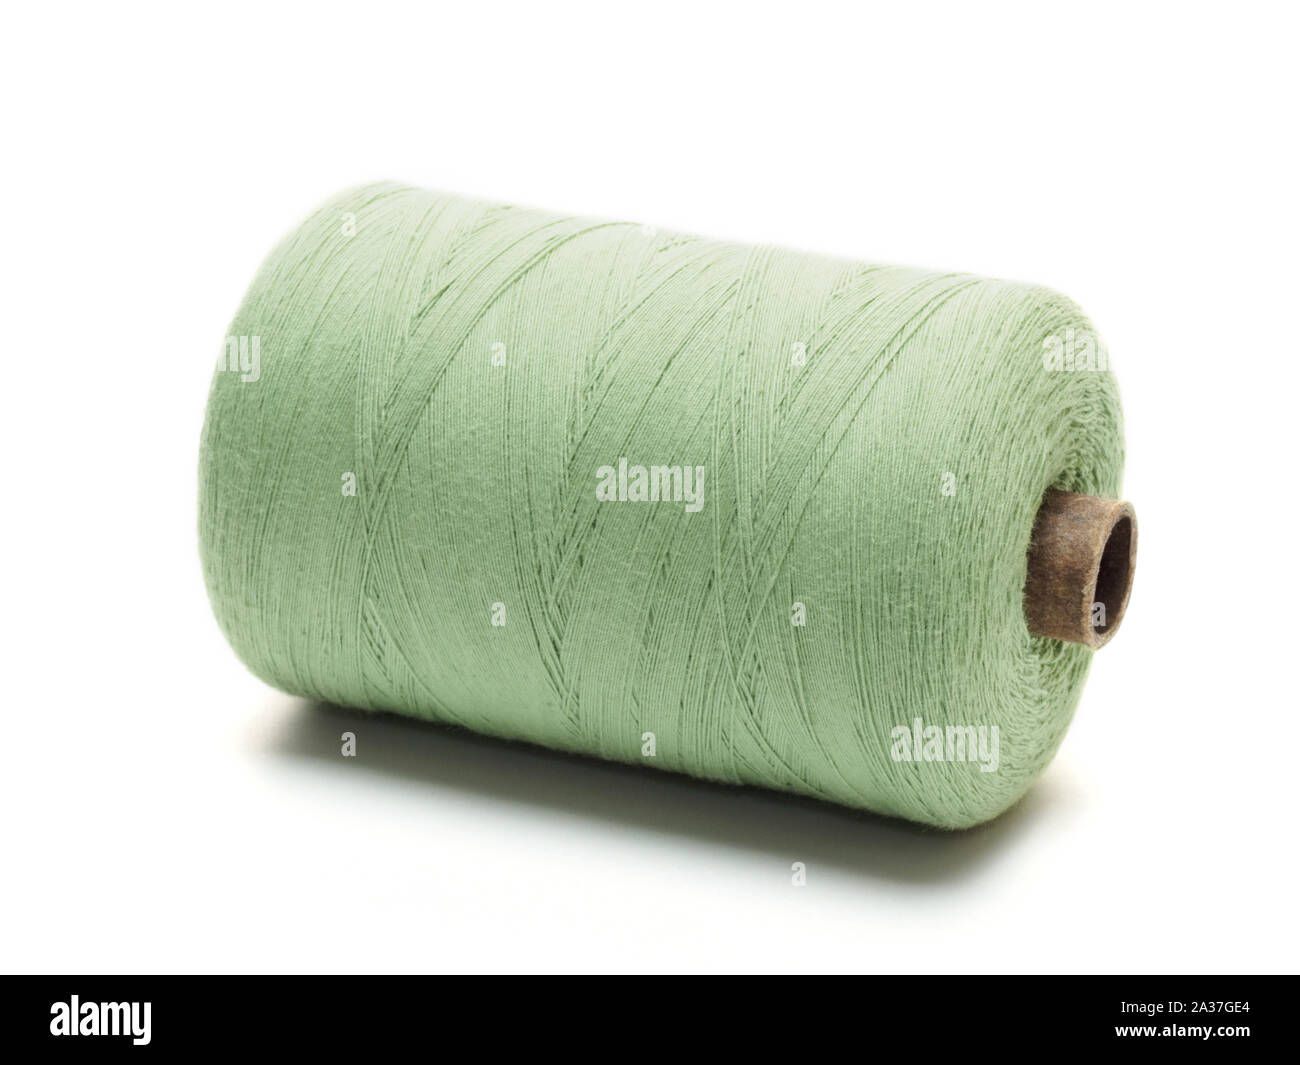 Green spool of thread in a horizontal position on a white background Stock Photo